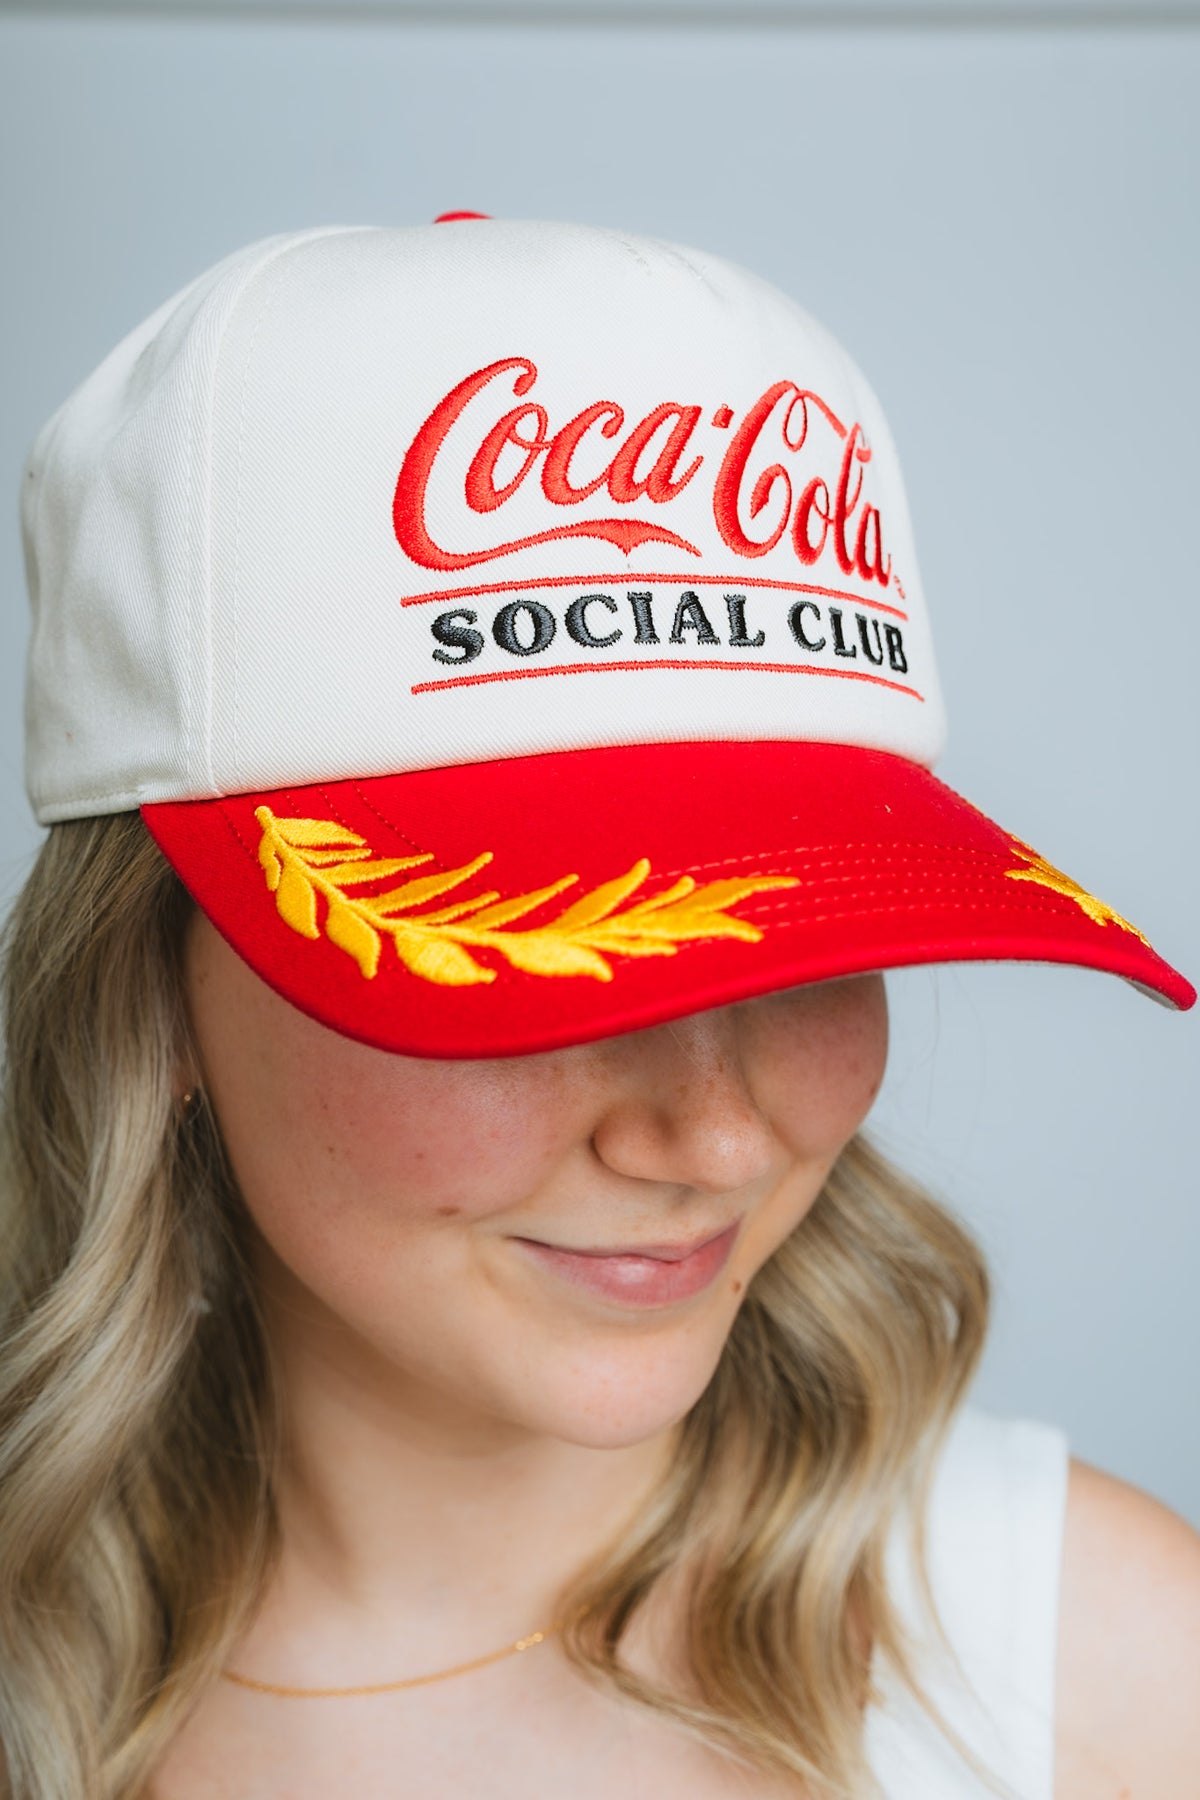 Coke club captain hat ivory/red - Trendy Gifts at Lush Fashion Lounge Boutique in Oklahoma City